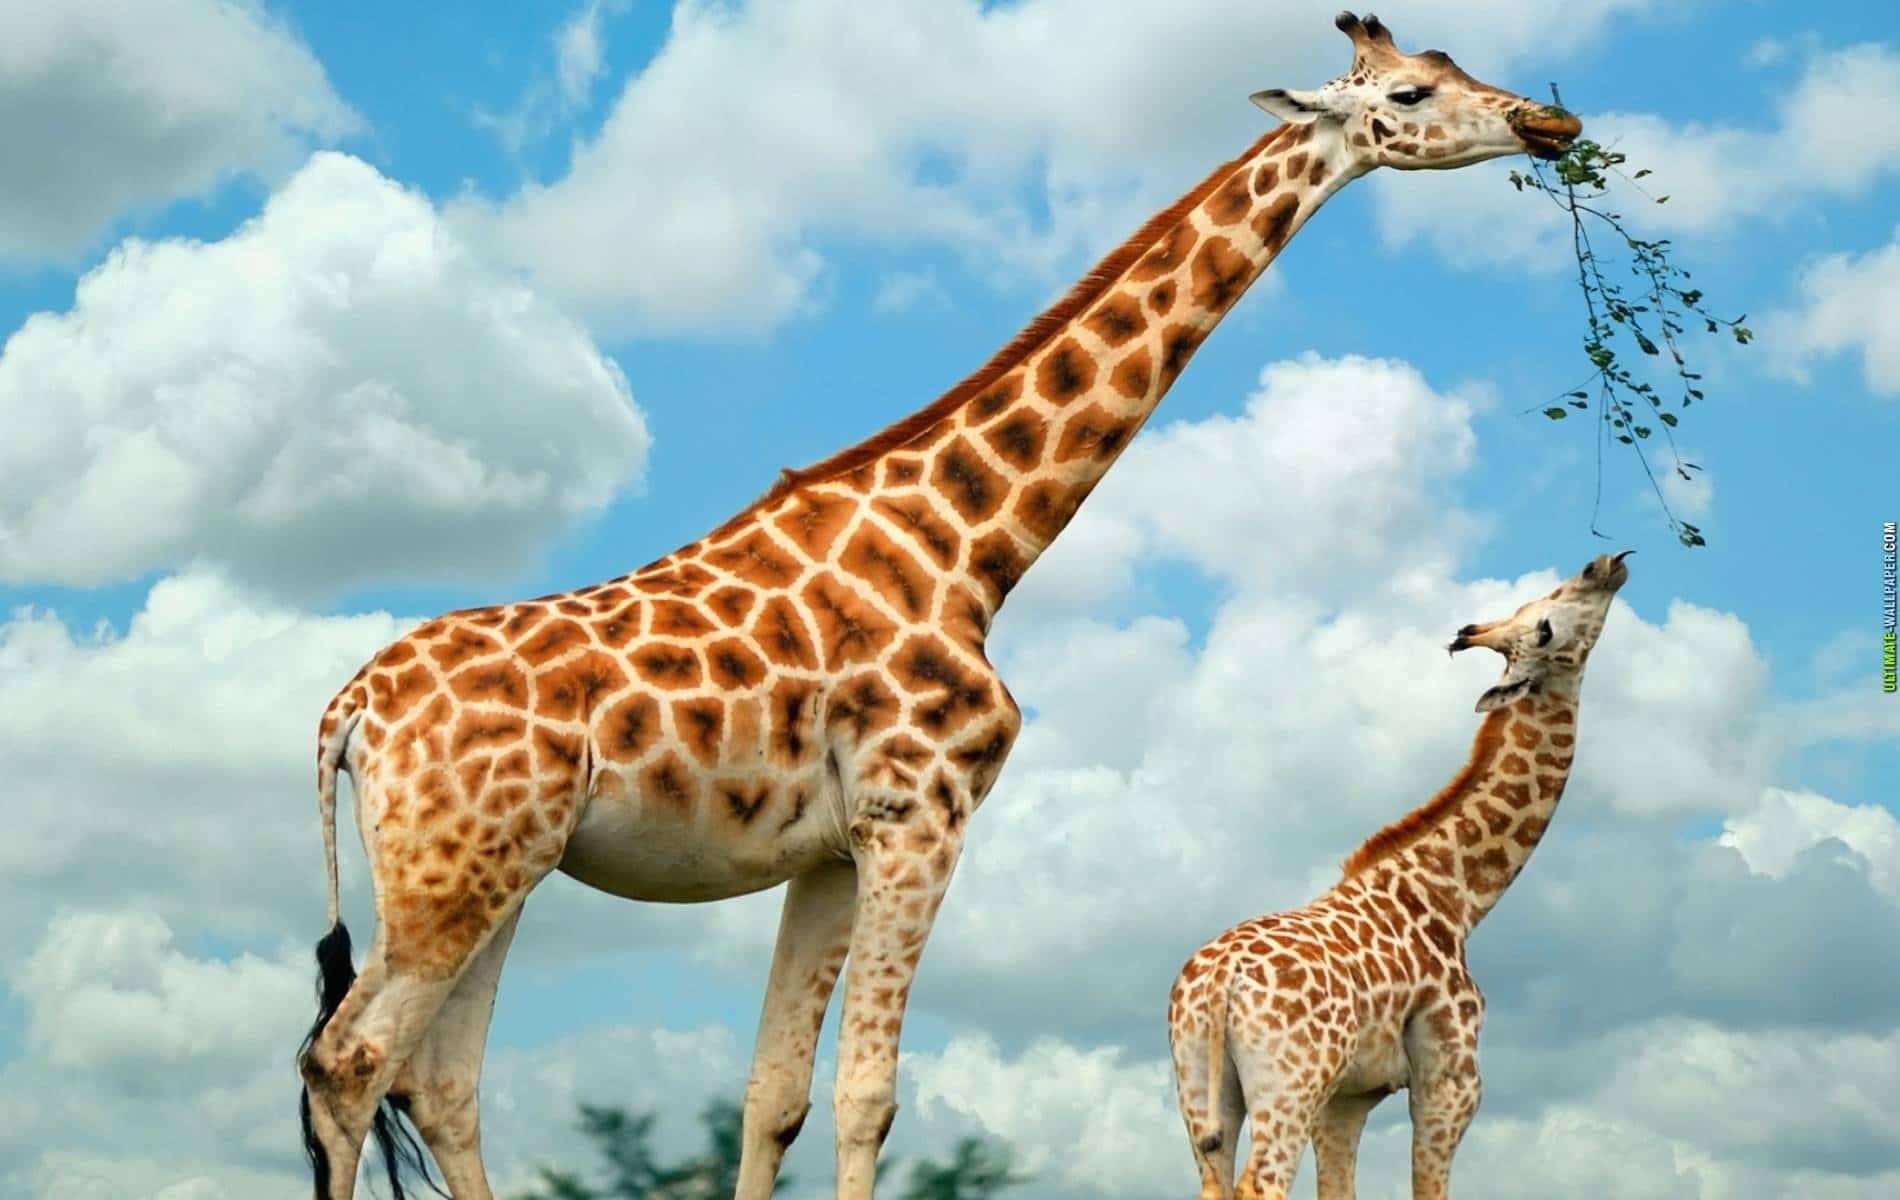 Giraffe Facts, Information Pictures and Video Learn More